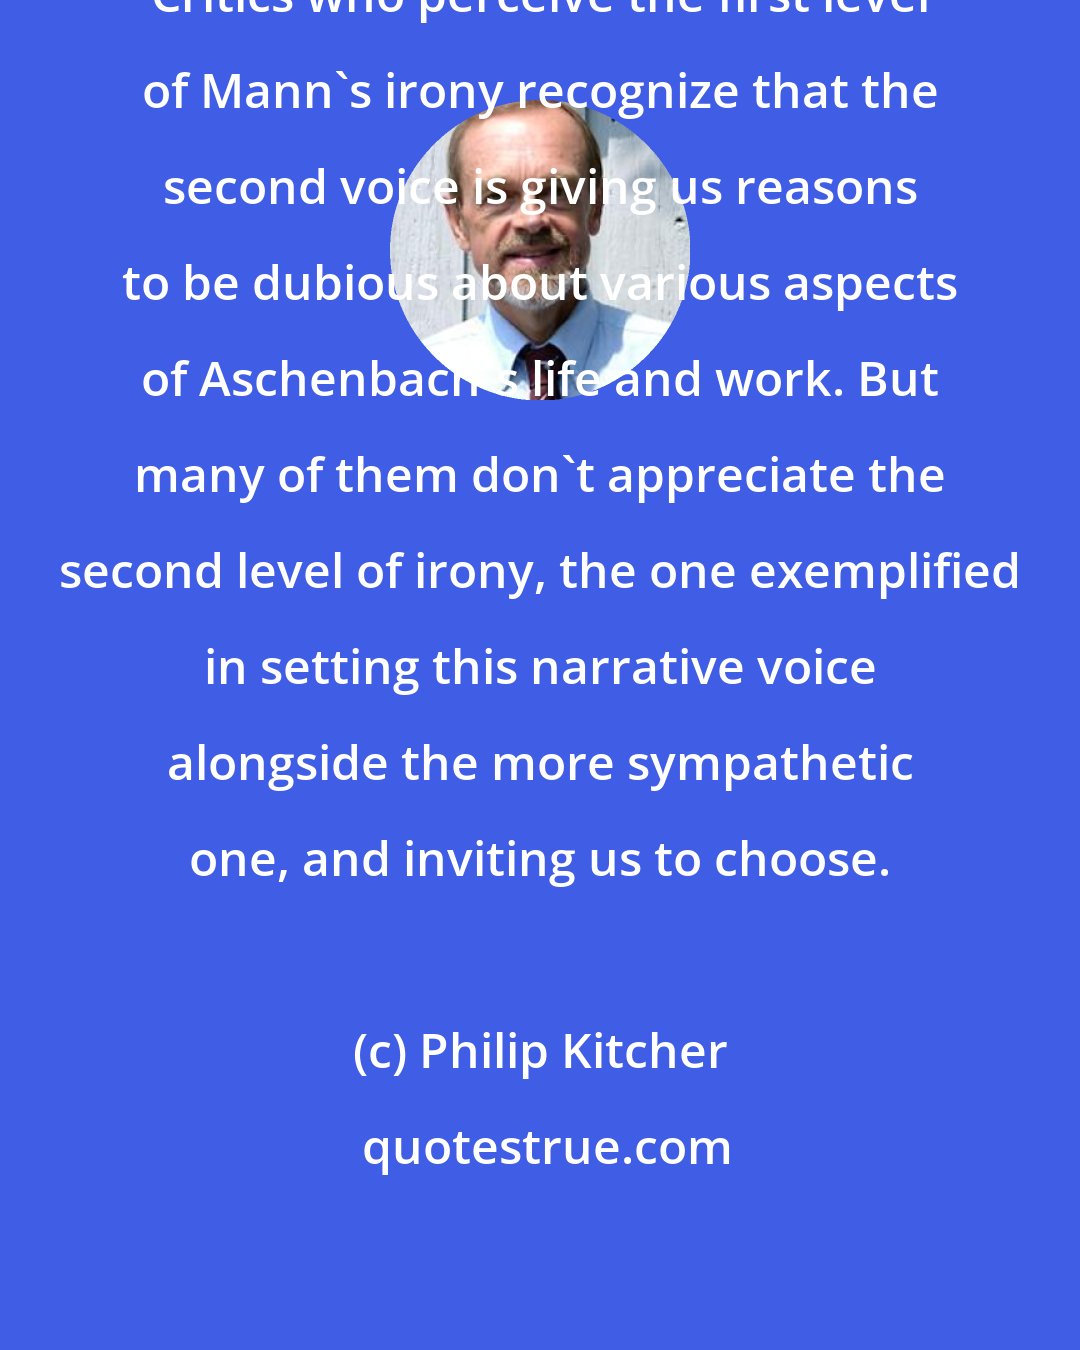 Philip Kitcher: Critics who perceive the first level of Mann's irony recognize that the second voice is giving us reasons to be dubious about various aspects of Aschenbach's life and work. But many of them don't appreciate the second level of irony, the one exemplified in setting this narrative voice alongside the more sympathetic one, and inviting us to choose.